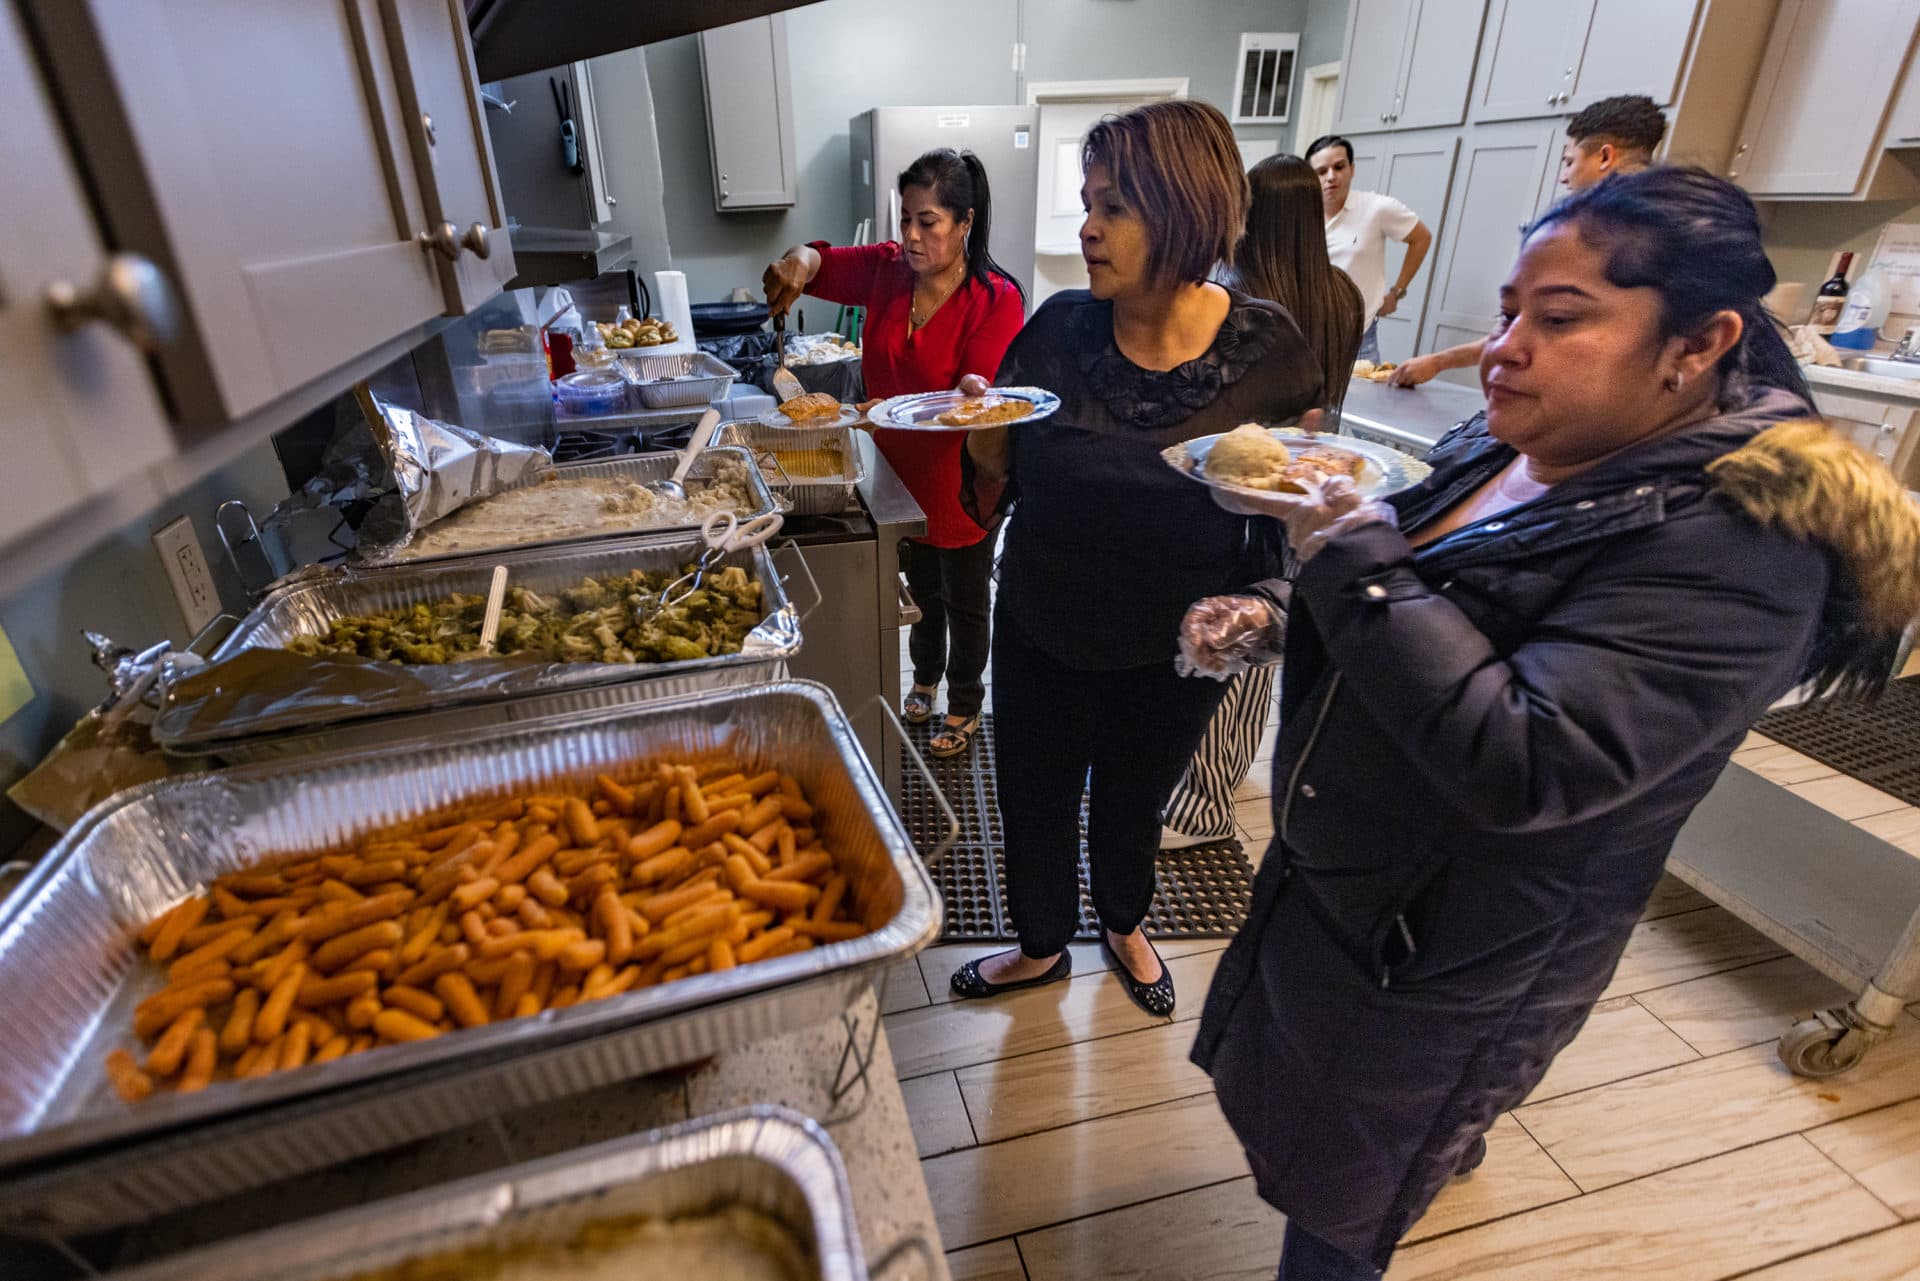 Isabel Rodriguez, center, and her cousins work to serve food for about 50 people at her mother's party. The 58-year-old prepared the food while balancing two jobs and helping her relatives. (Jesse Costa/WBUR)